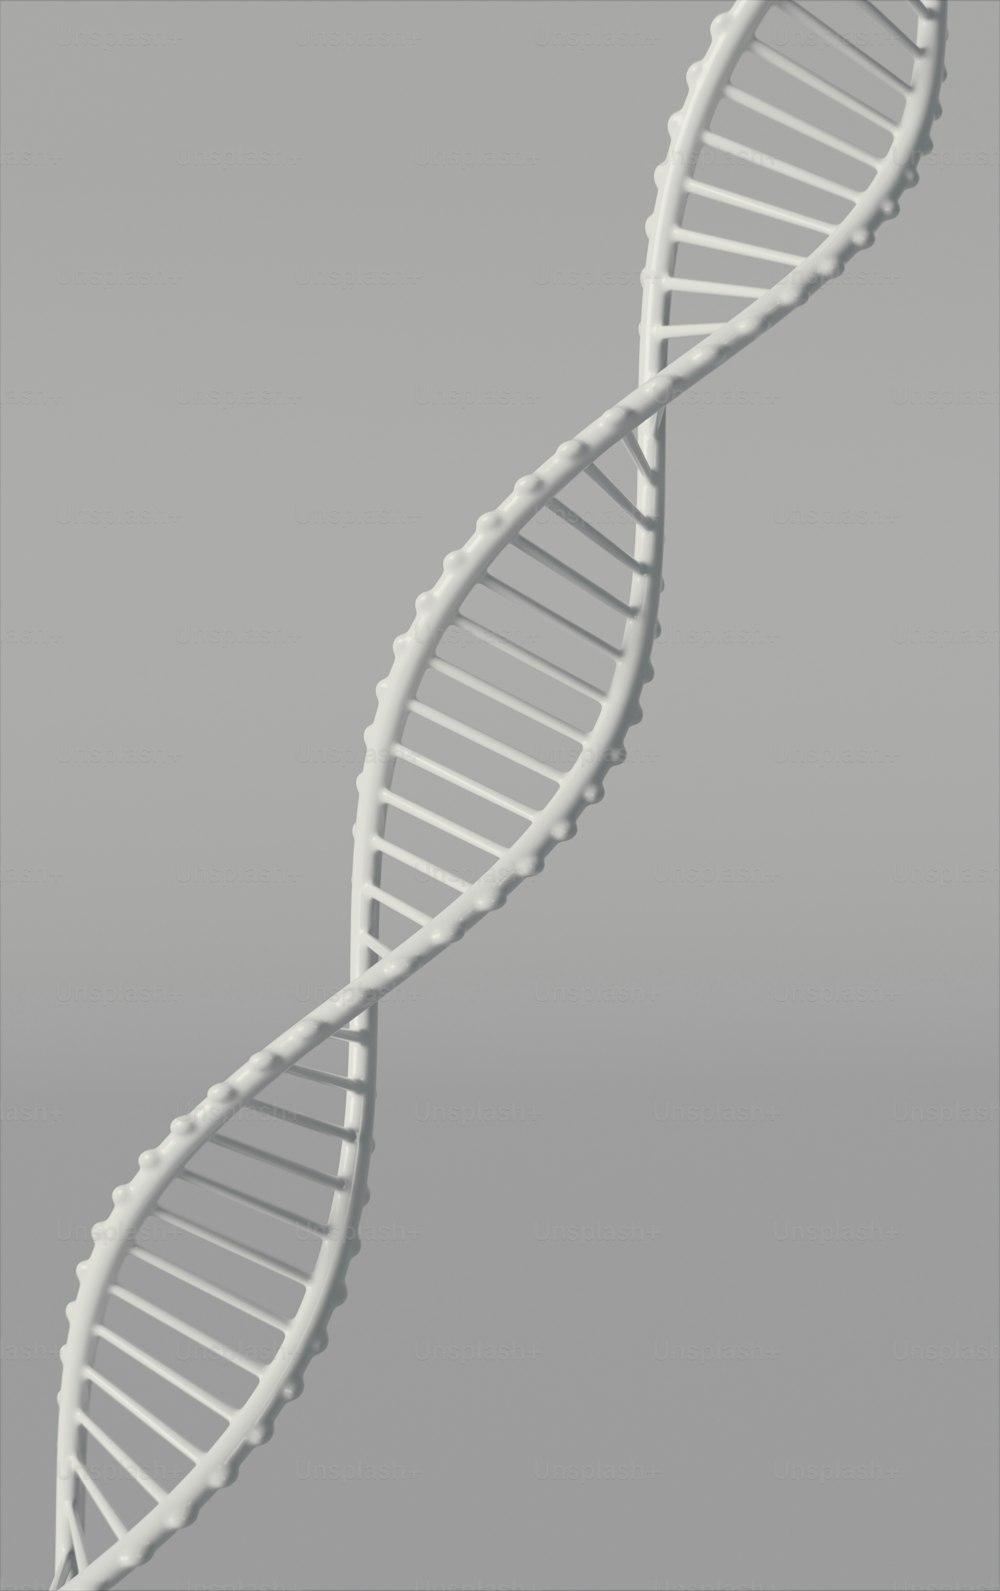 a 3d model of a double - stranded, white, spiral - shaped,